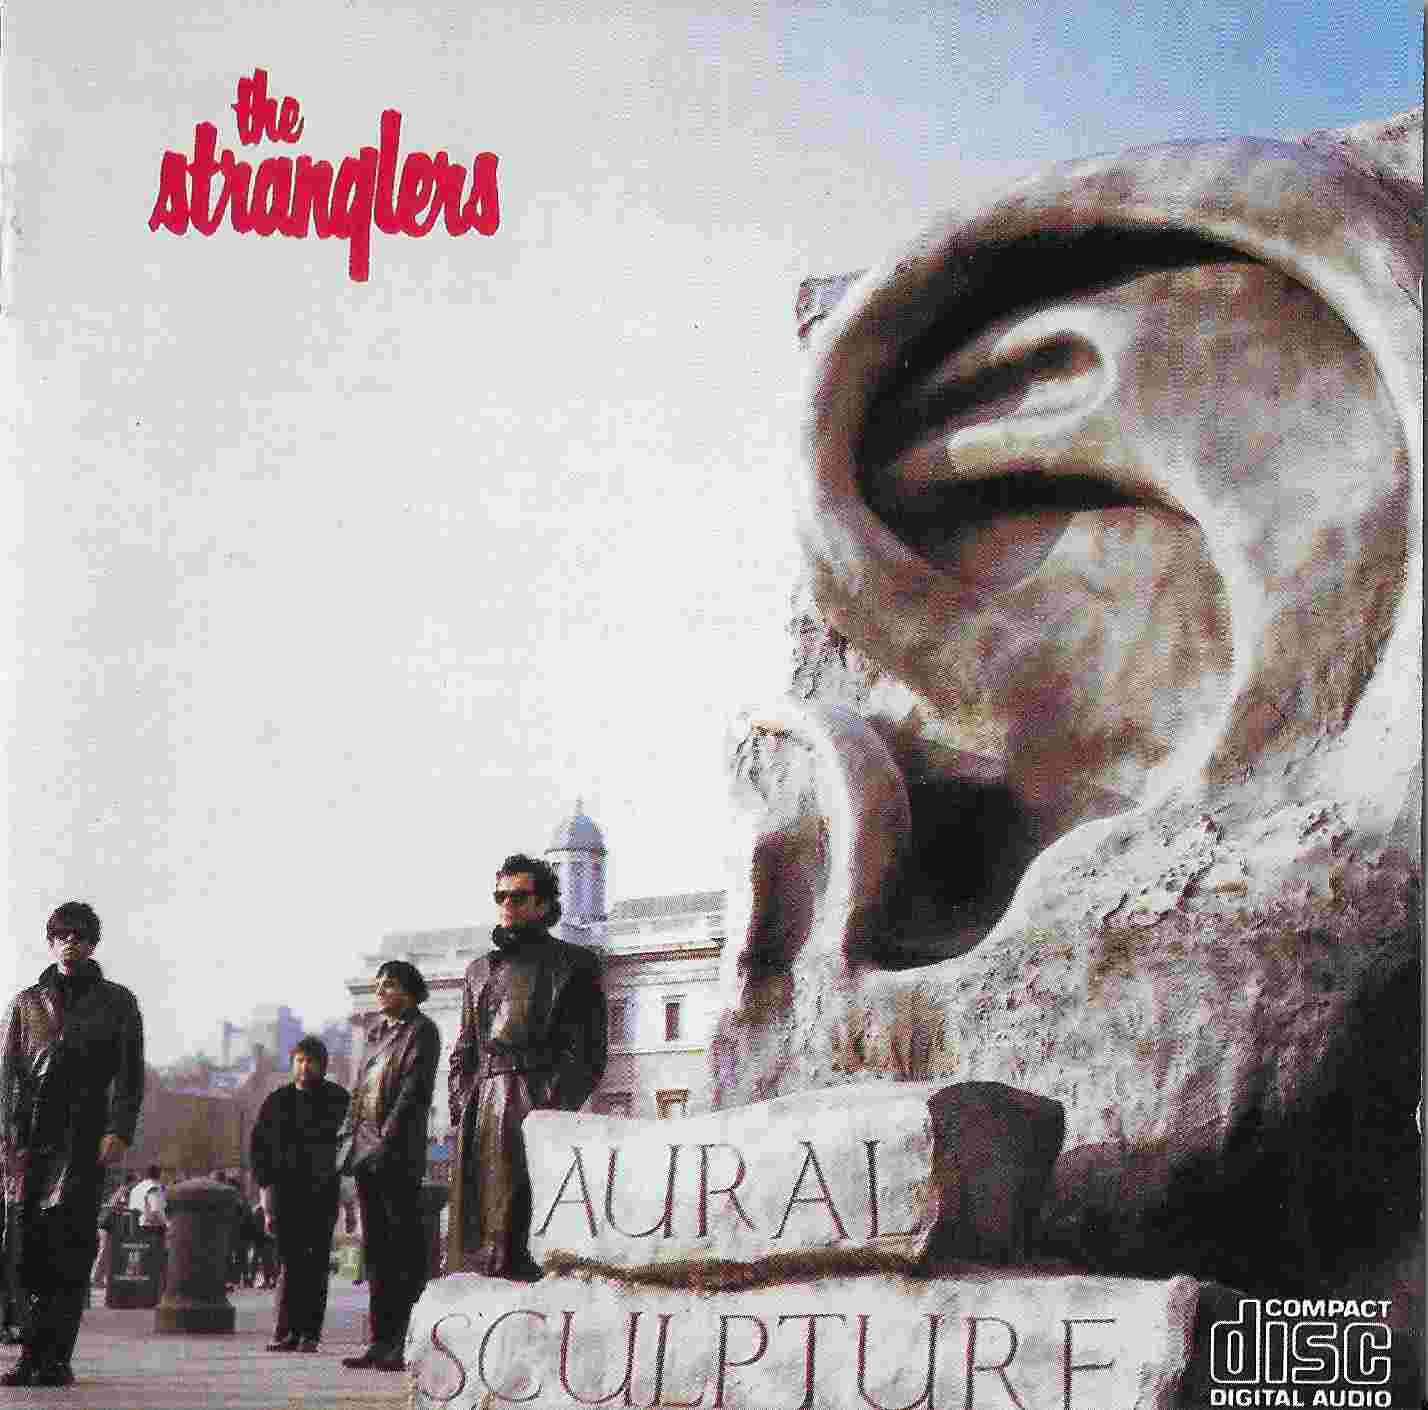 Picture of CDEPC 26220 Aural sculpture by artist The Stranglers from The Stranglers cds